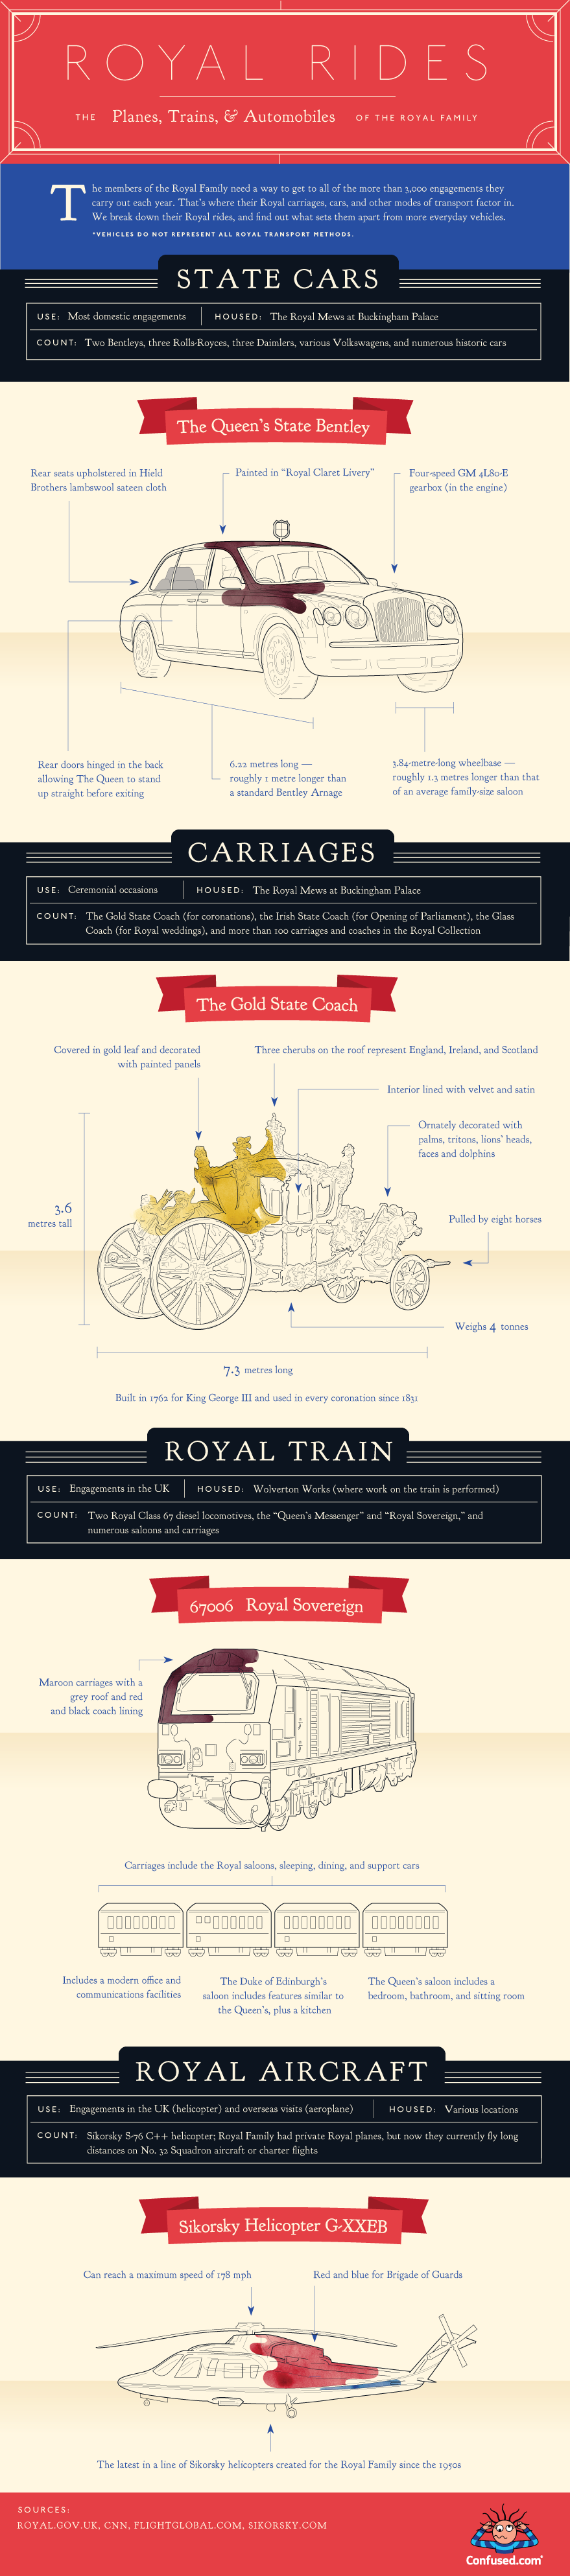 Royal Rides: How Britain's Royal Family Gets Around